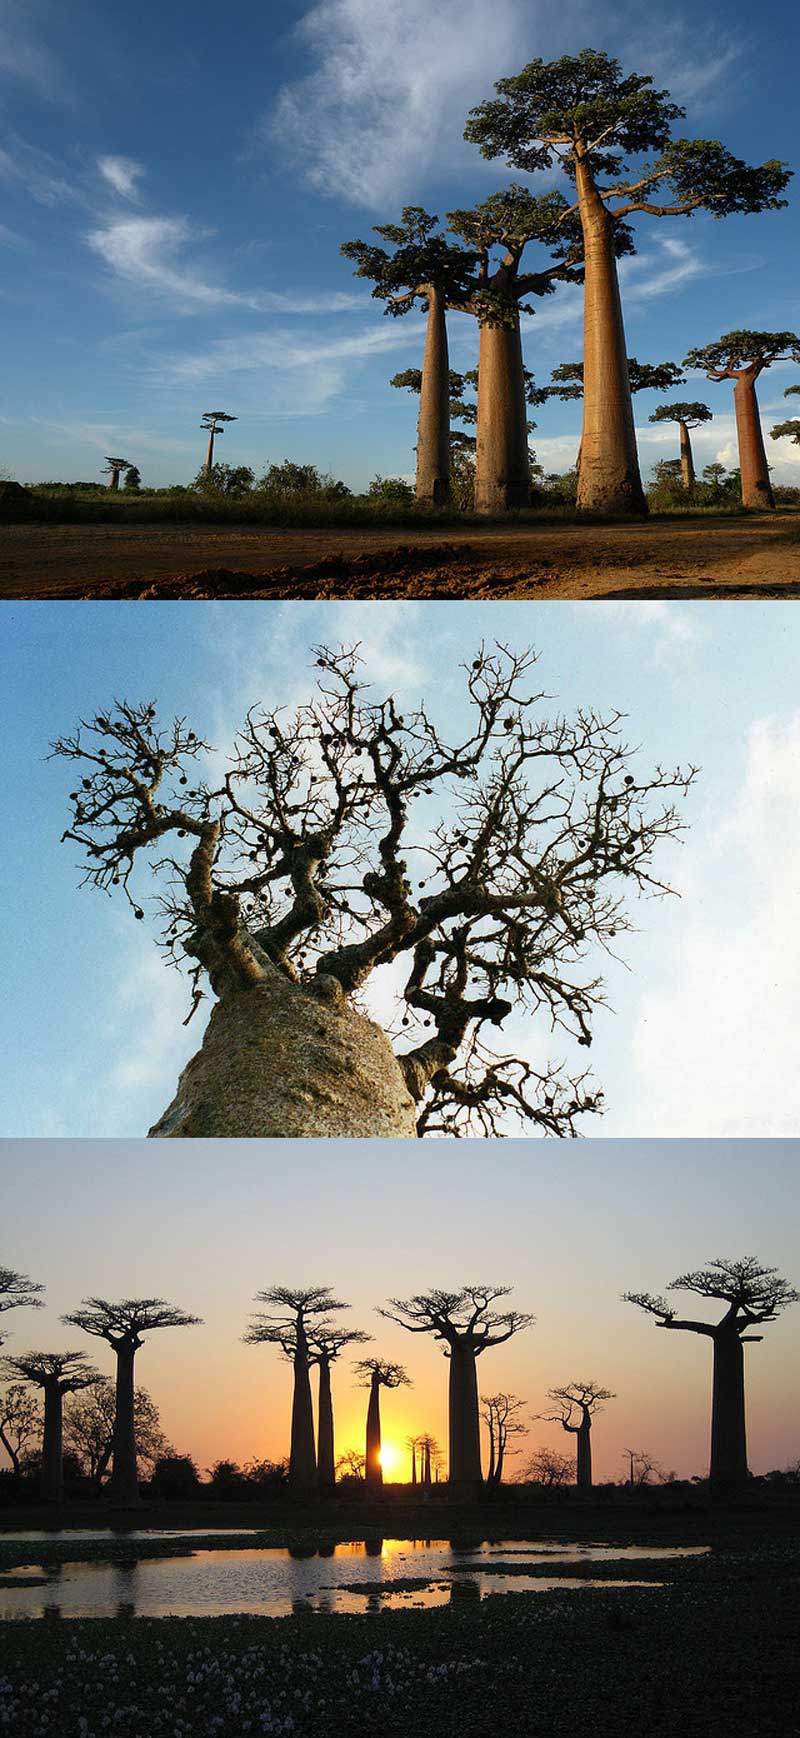 Fact: There are six species of baobab trees in Madagascar